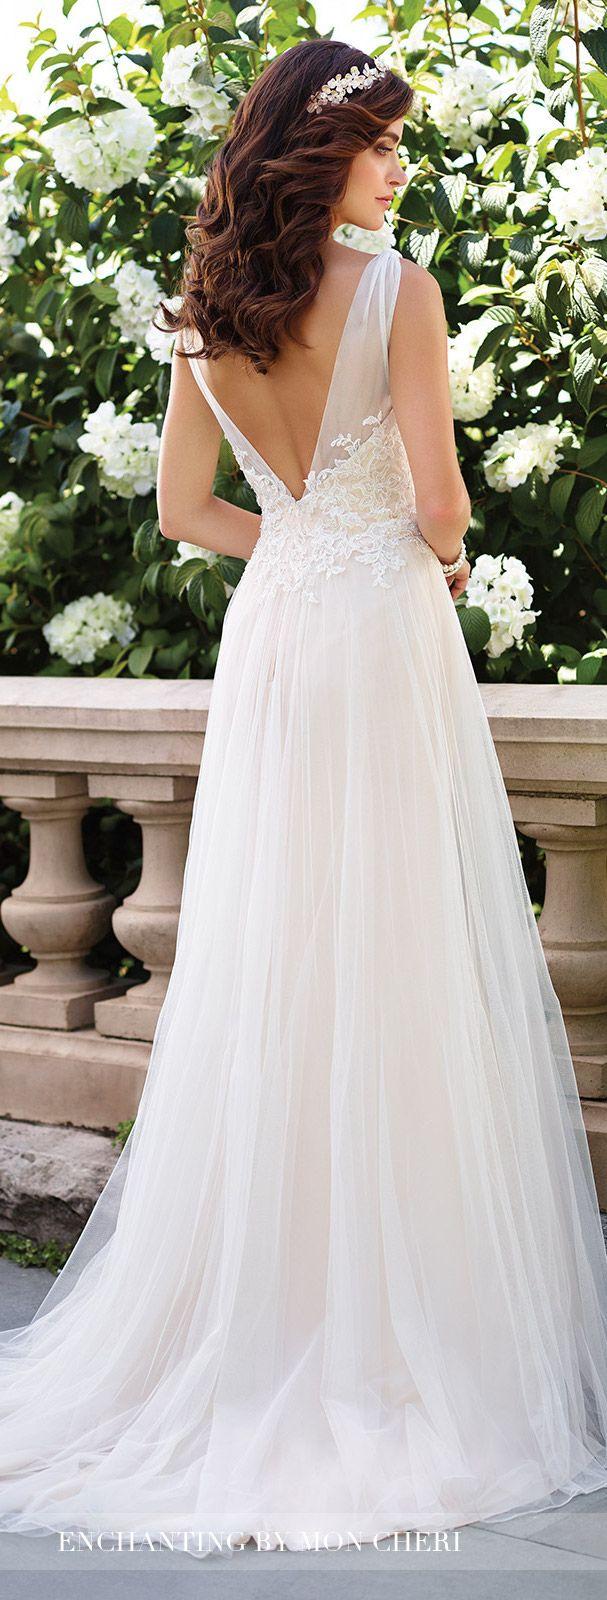 Mariage - Tulle And Lace A-Line Wedding Dress- 117176- Enchanting By Mon Cheri